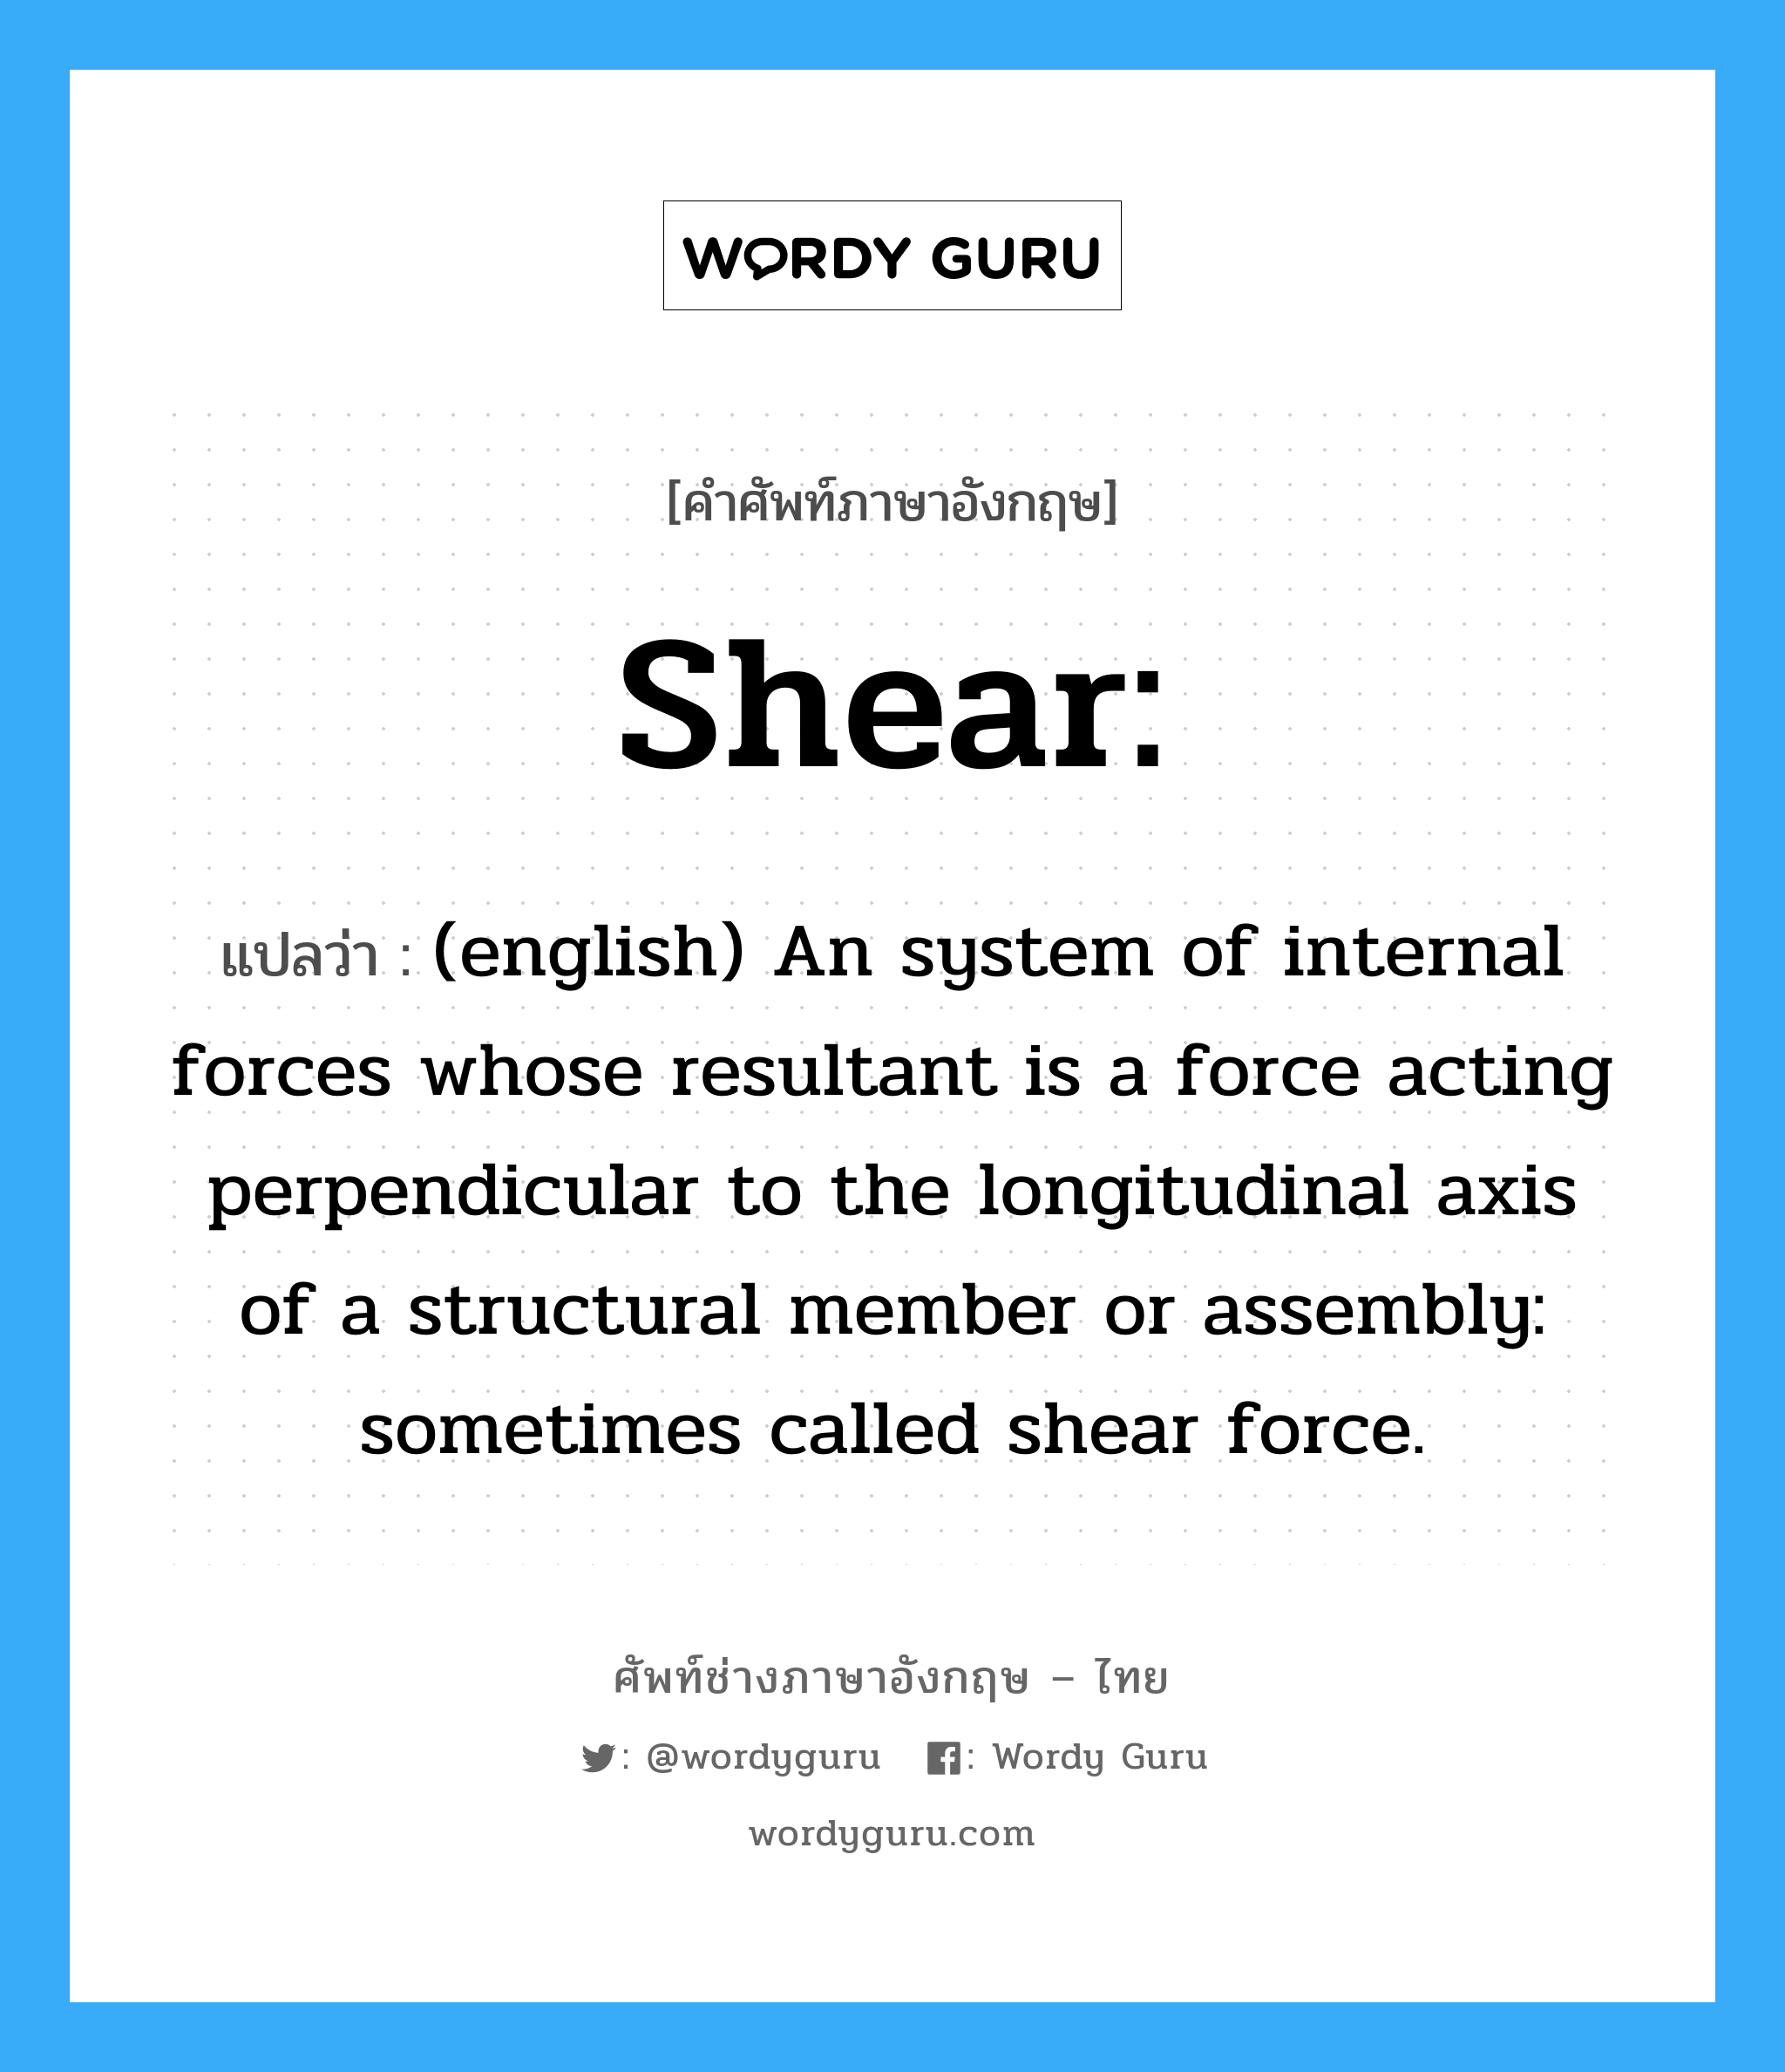 (english) An system of internal forces whose resultant is a force acting perpendicular to the longitudinal axis of a structural member or assembly: sometimes called shear force. ภาษาอังกฤษ?, คำศัพท์ช่างภาษาอังกฤษ - ไทย (english) An system of internal forces whose resultant is a force acting perpendicular to the longitudinal axis of a structural member or assembly: sometimes called shear force. คำศัพท์ภาษาอังกฤษ (english) An system of internal forces whose resultant is a force acting perpendicular to the longitudinal axis of a structural member or assembly: sometimes called shear force. แปลว่า Shear: